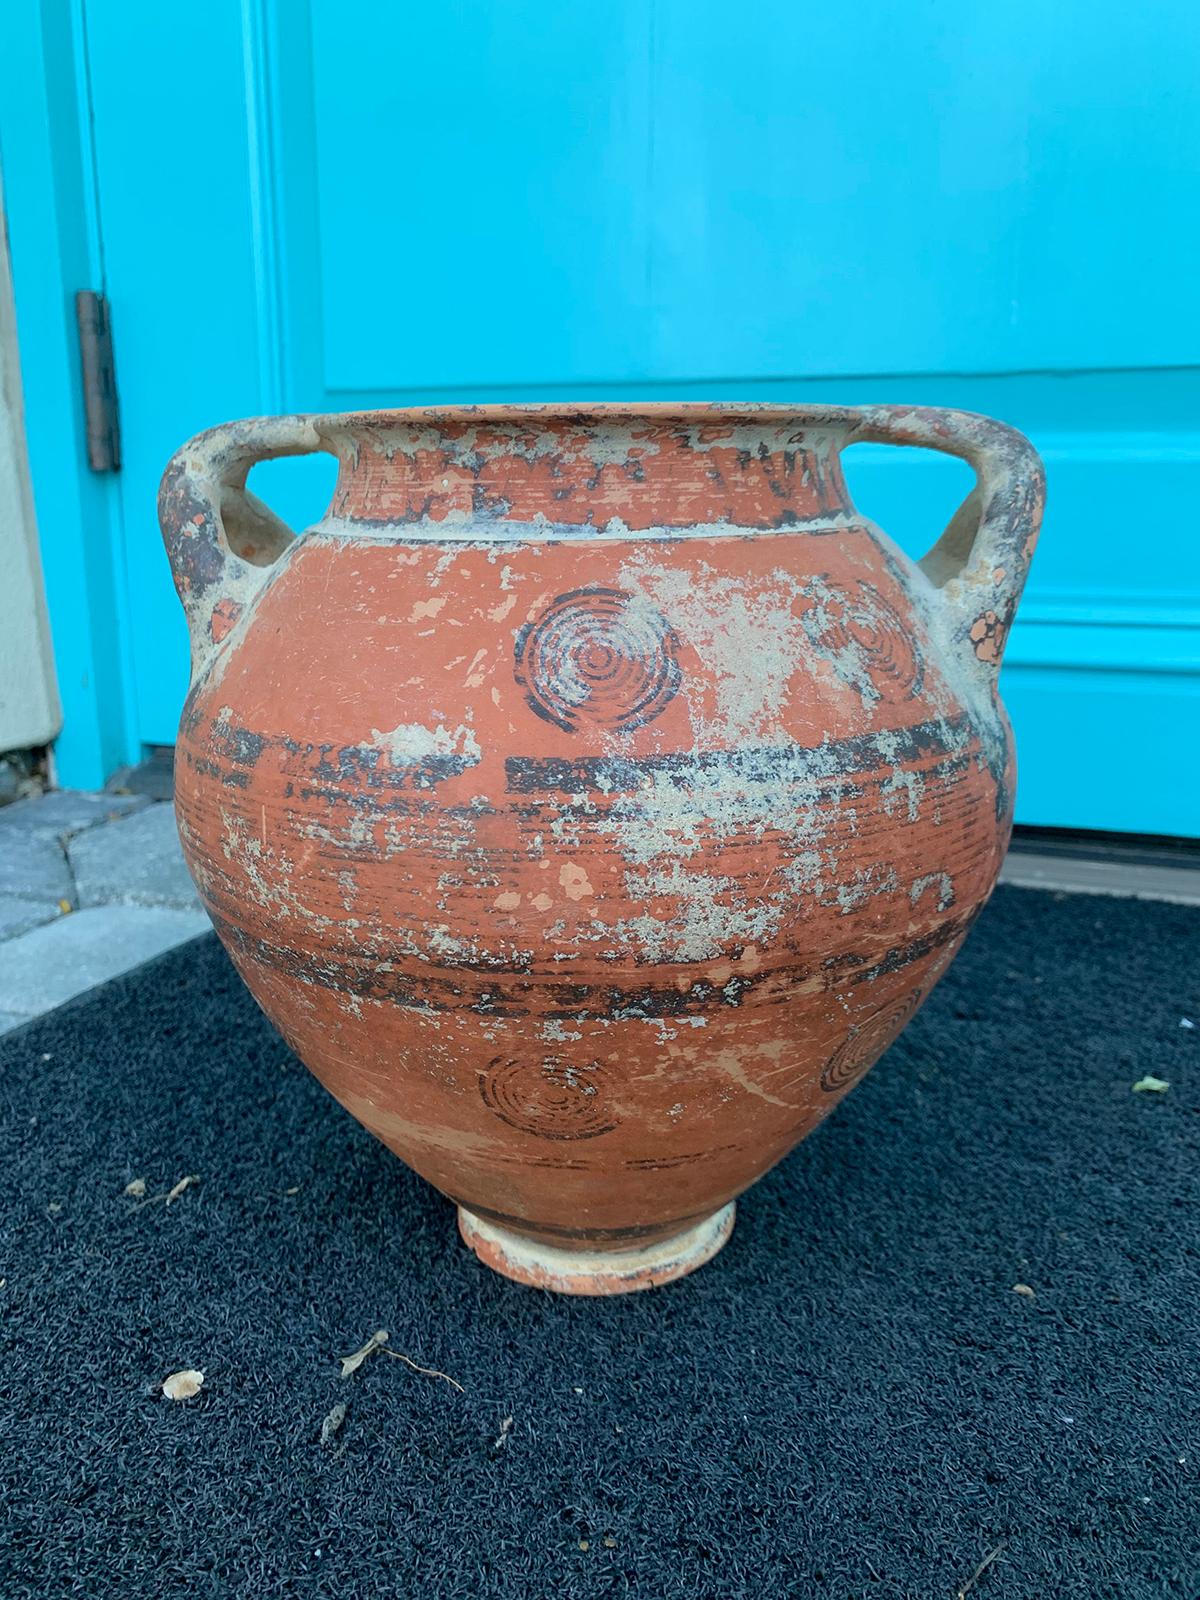 17th century or earlier (possibly ancient) Cypriot Phoenician terracotta decorated Jar with bull's eyes
Provenance: Palm Beach, FL.